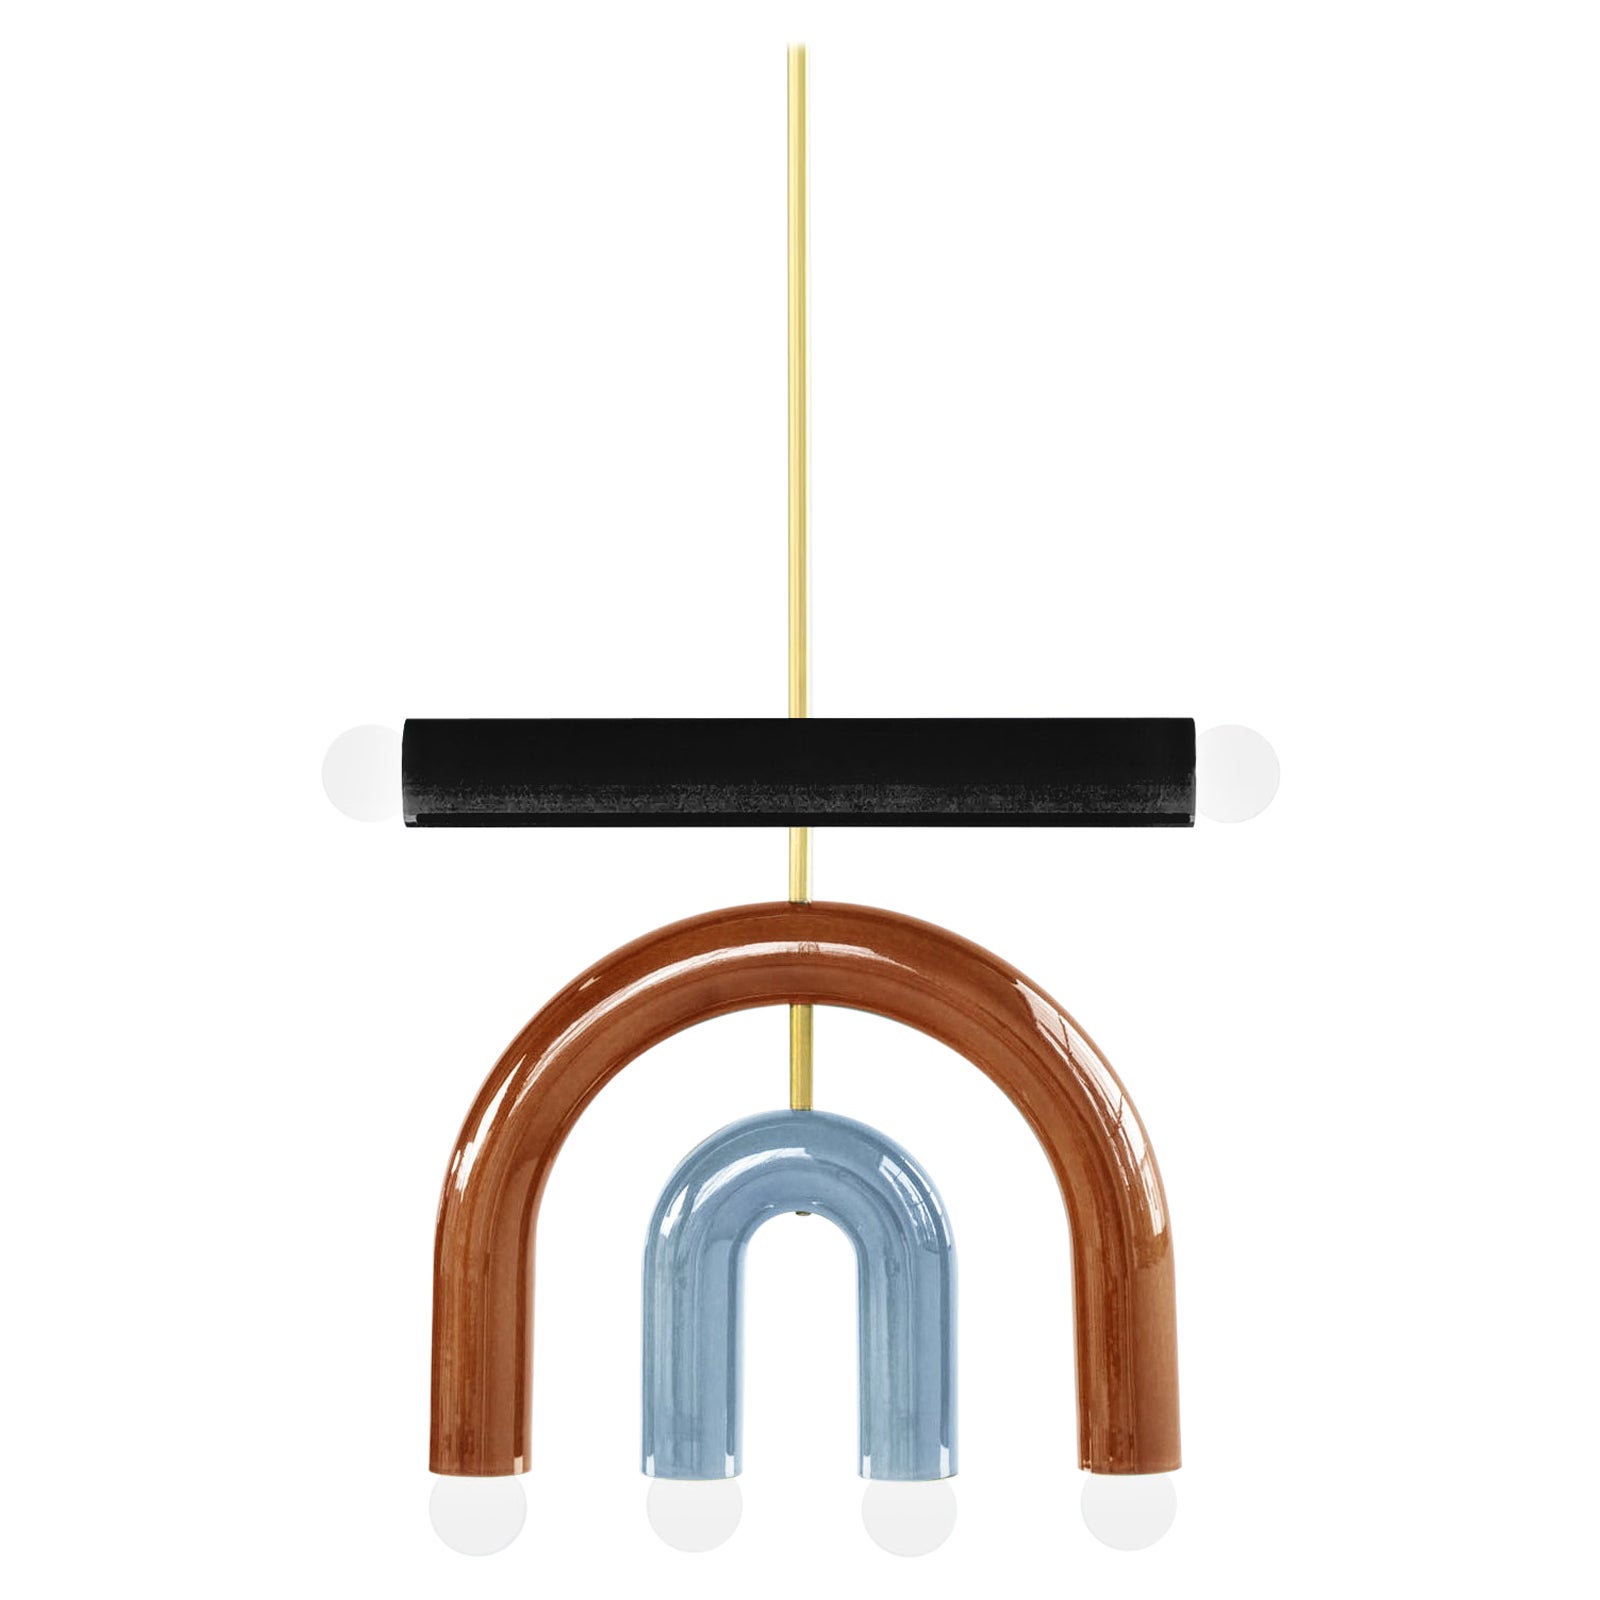 TRN D1 Pendant lamp / ceiling lamp / chandelier 
Designer: Pani Jurek

Model shown: TRN D1, Brown, Medium blue, Brown, Brass rod
Dimensions: H 37.5 x 35 x 5 cm

Bulb (not included): E27/E26, compatible with US electric system

Materials: Hand glazed